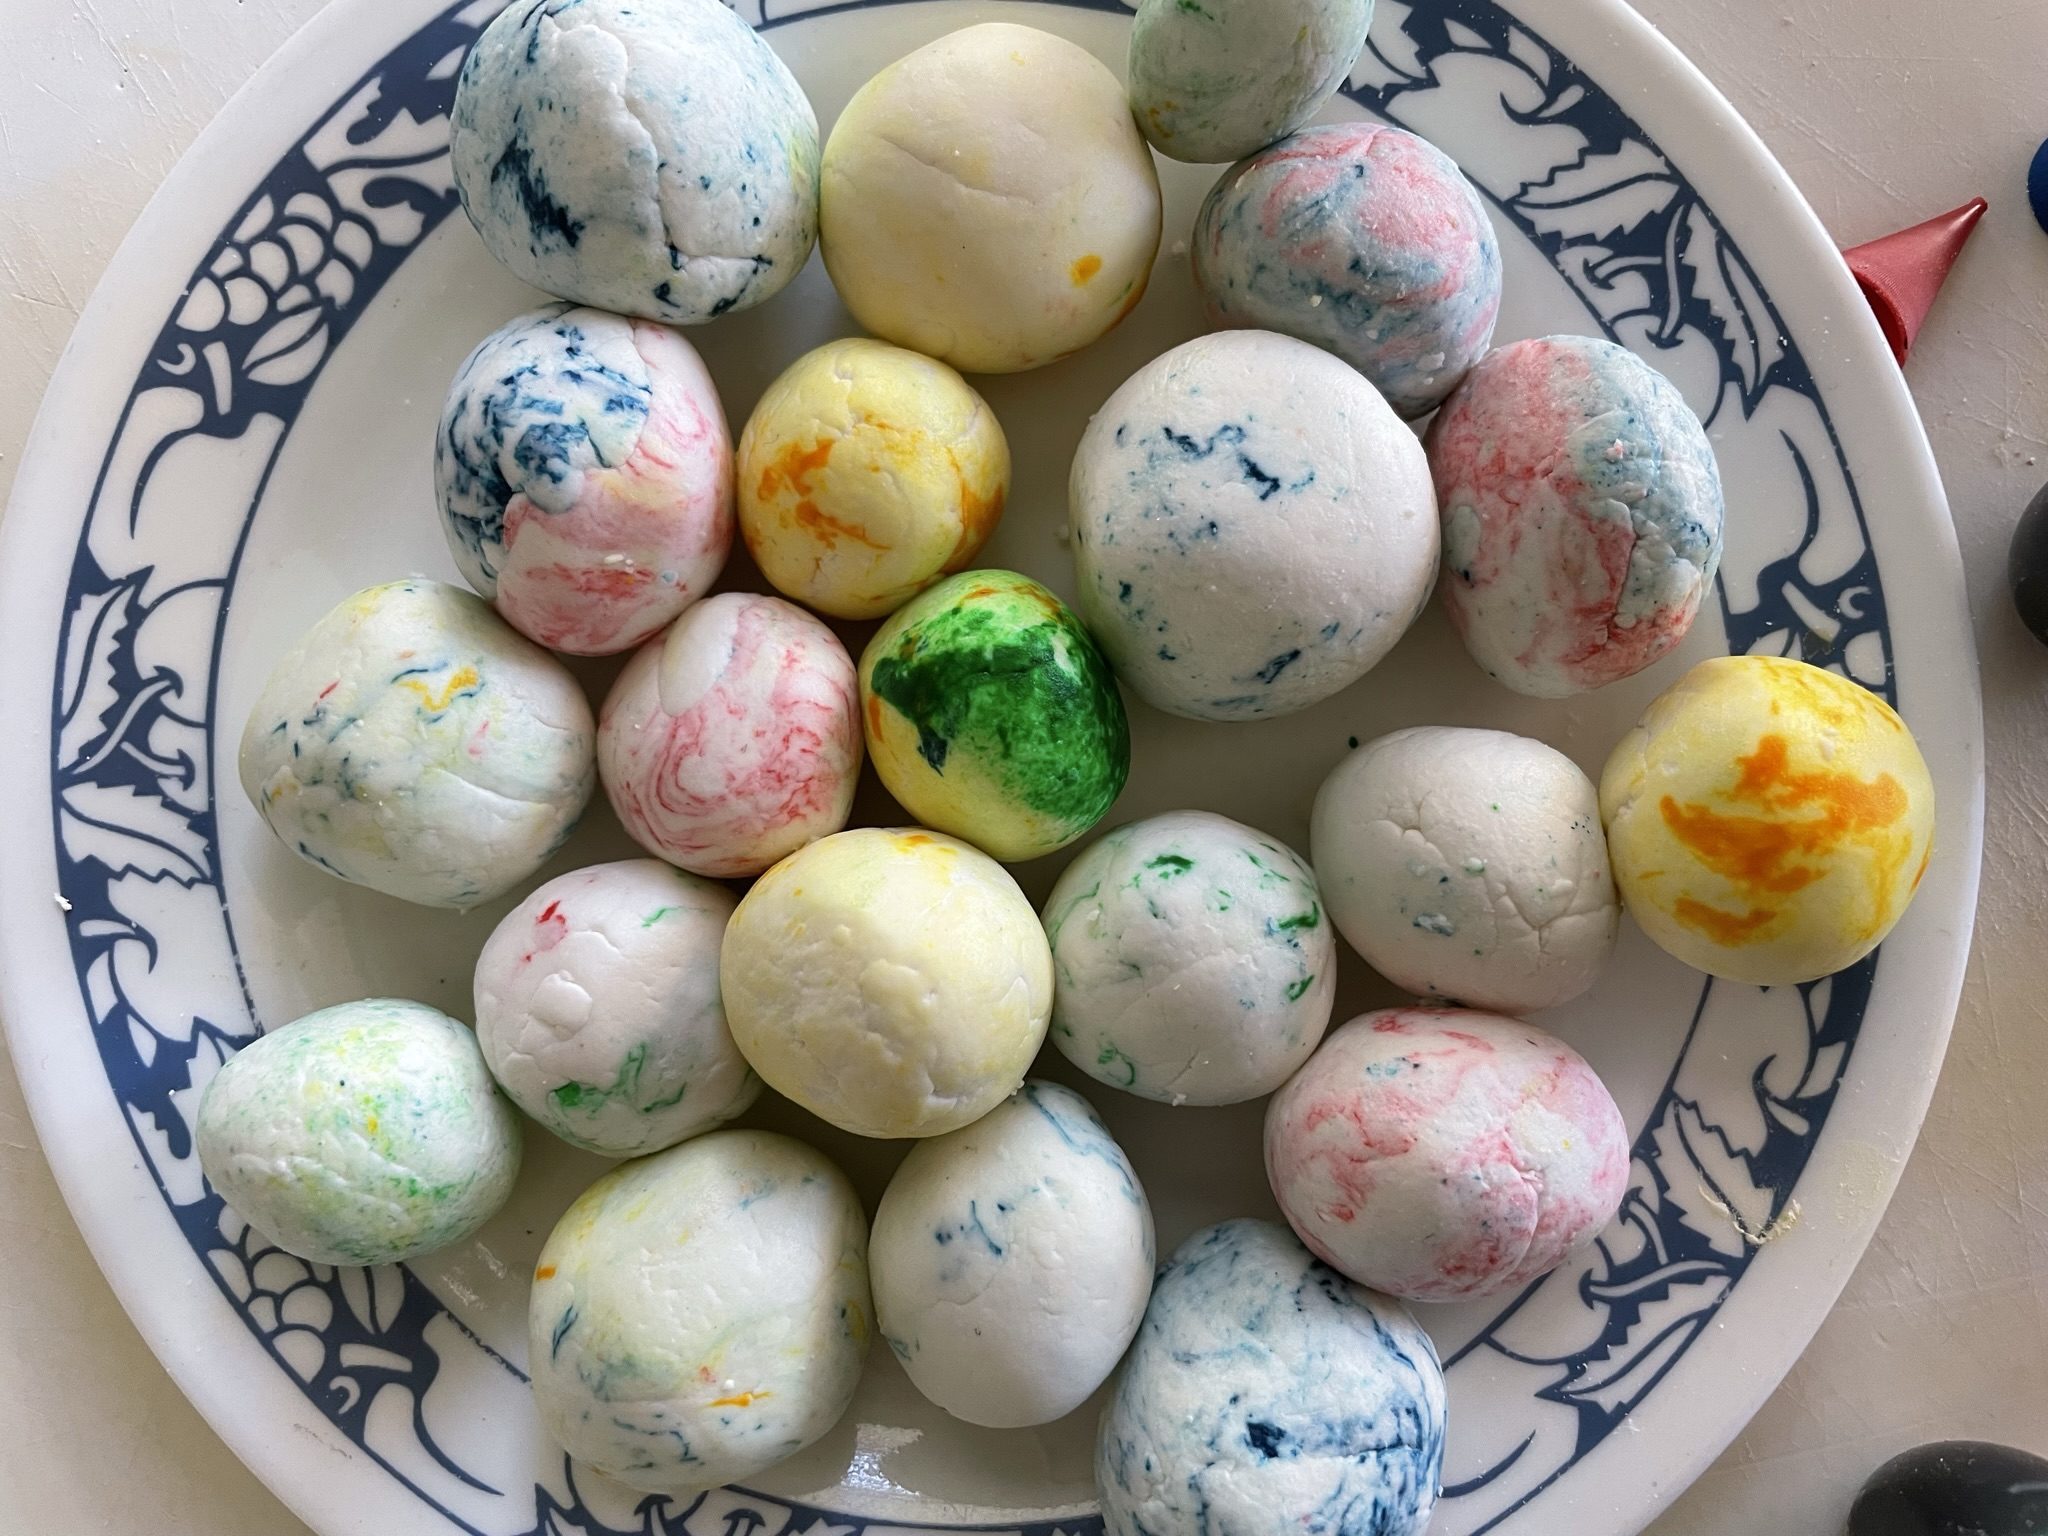 Glutinous rice balls with food coloring.